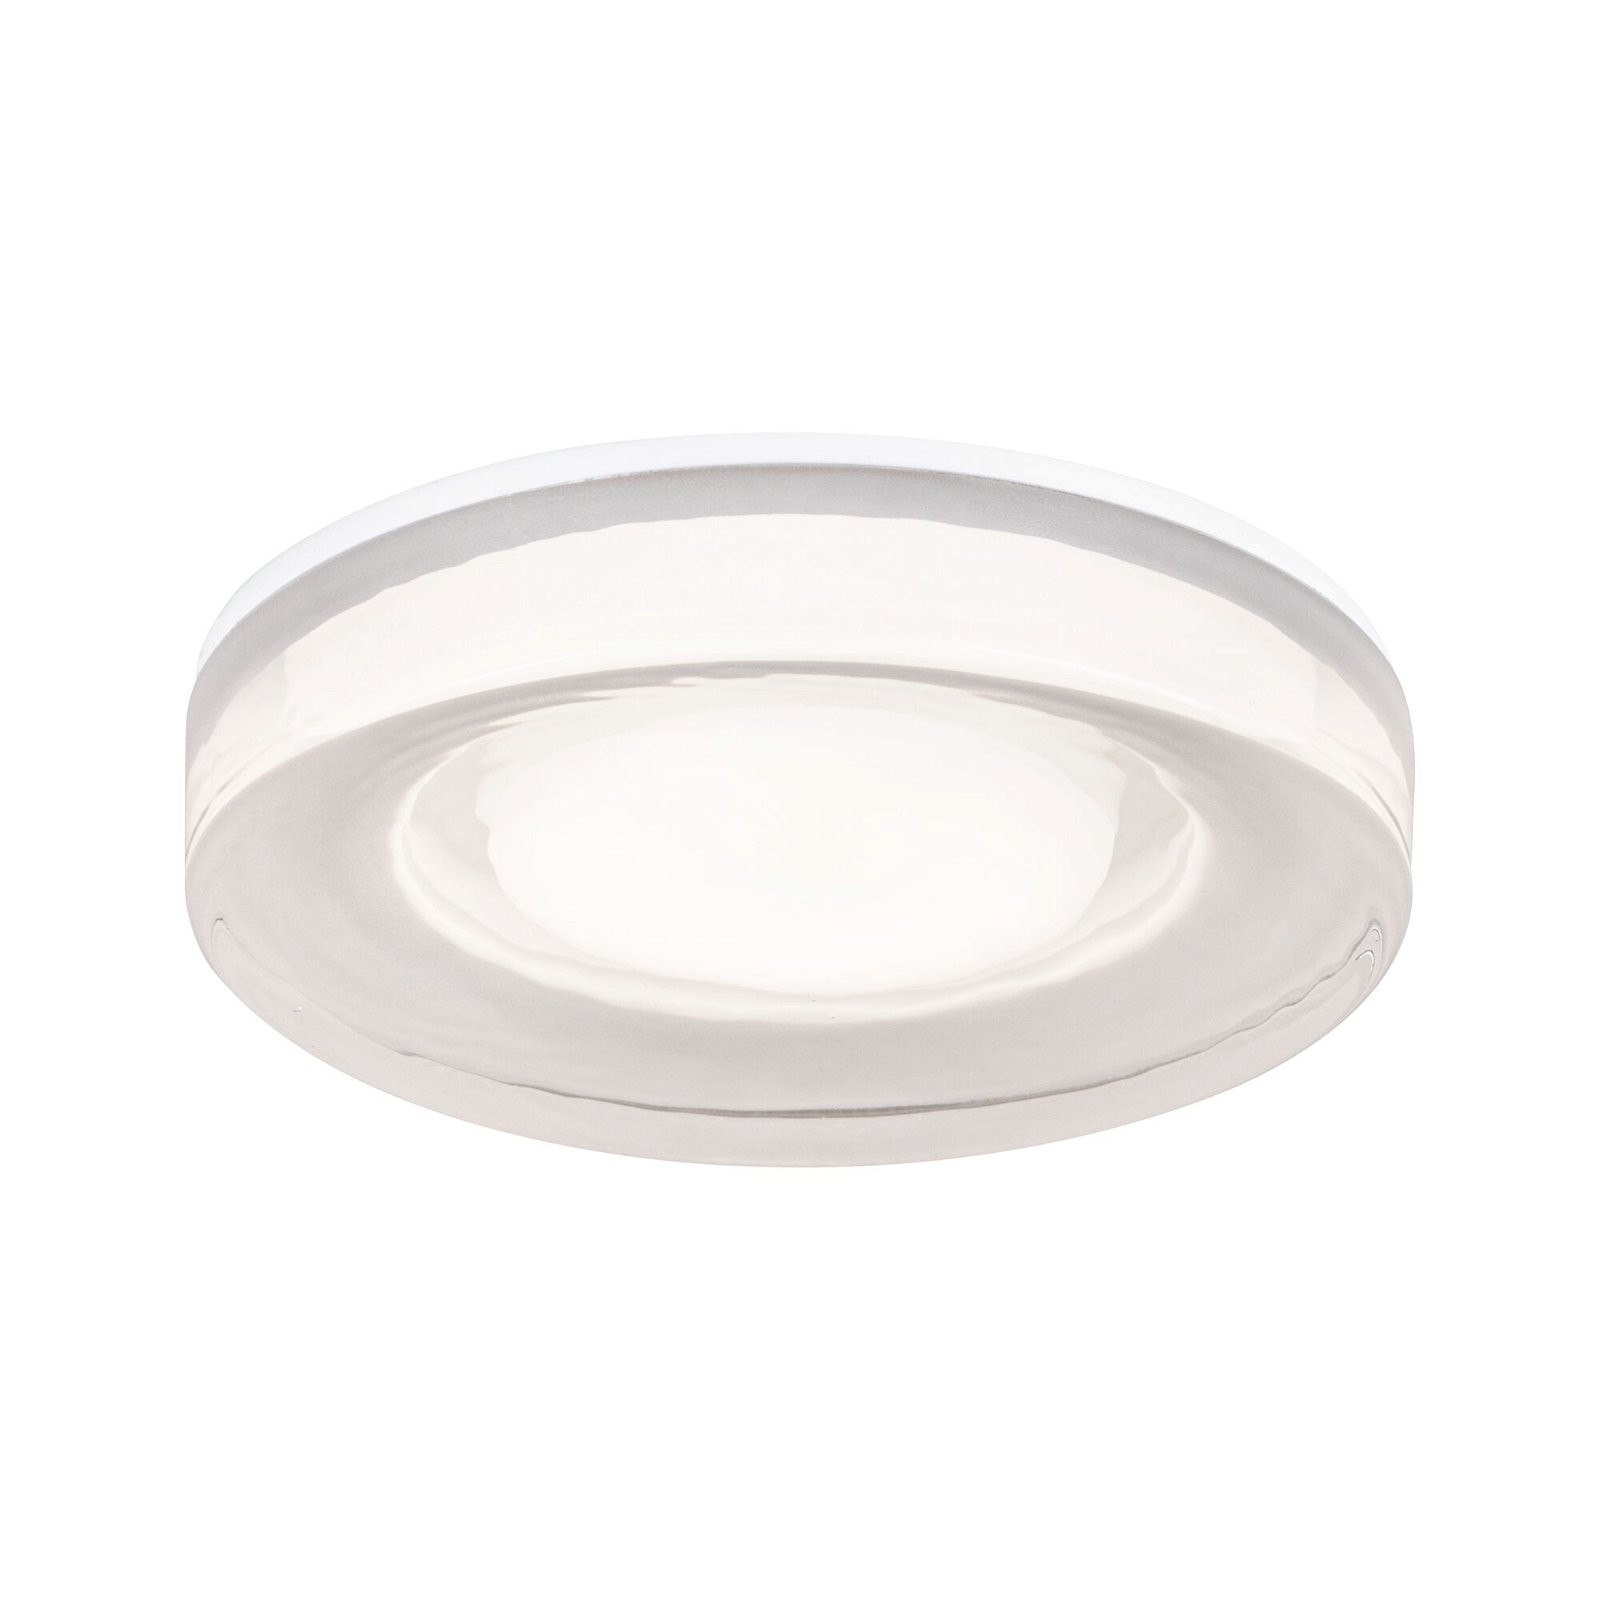 Recessed luminaire Luena IP65 GU10 230V max. 35W dimmable White